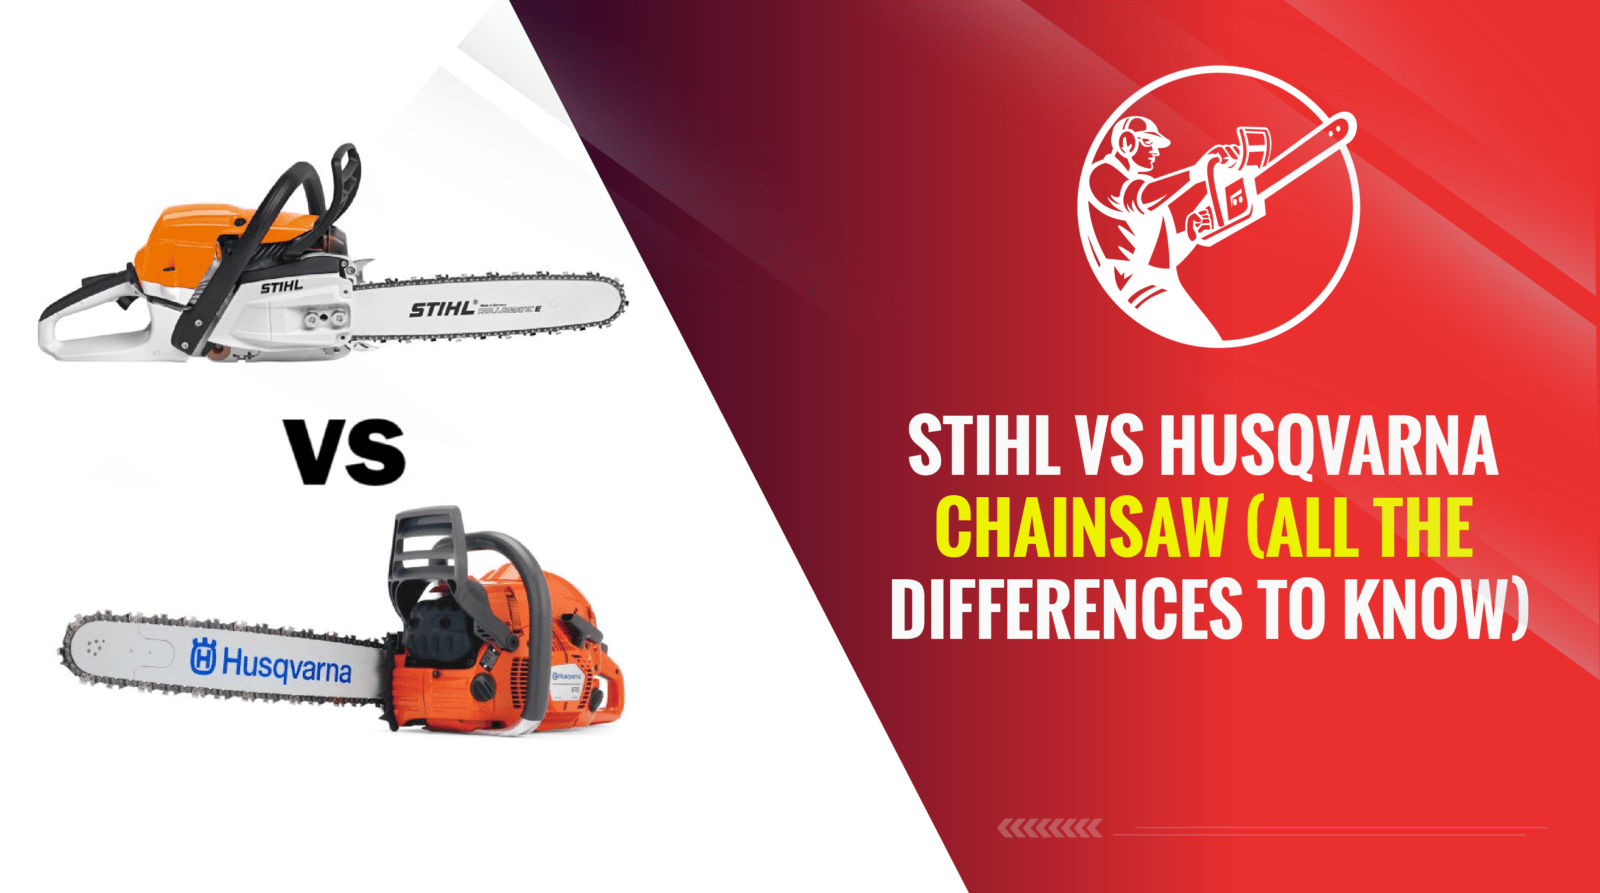 Stihl vs Husqvarna chainsaw (All The Differences To Know)